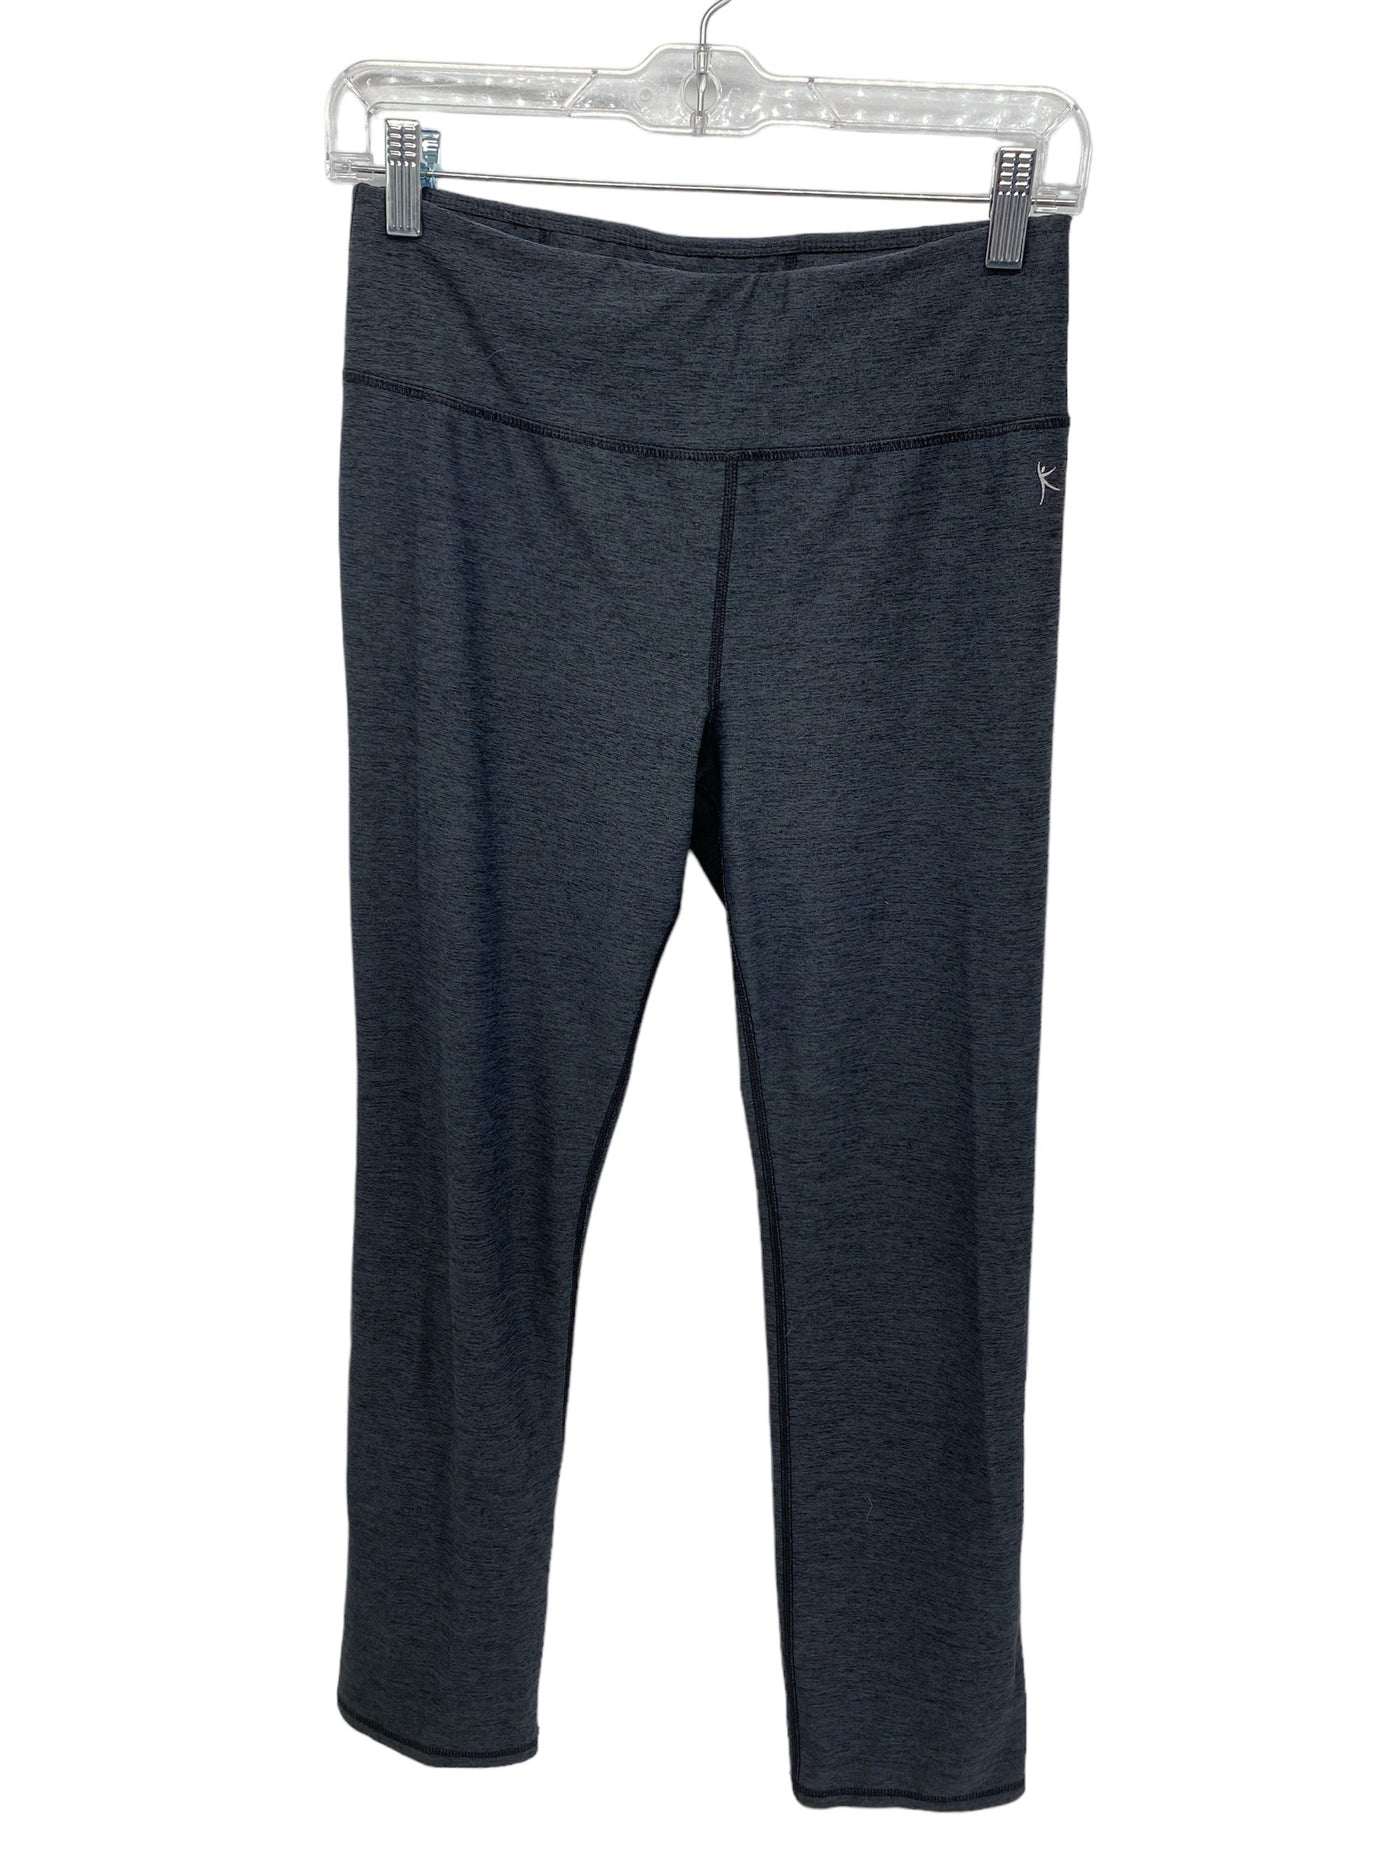 Danskin Now Misses Size Small Grey Athleisure Pants